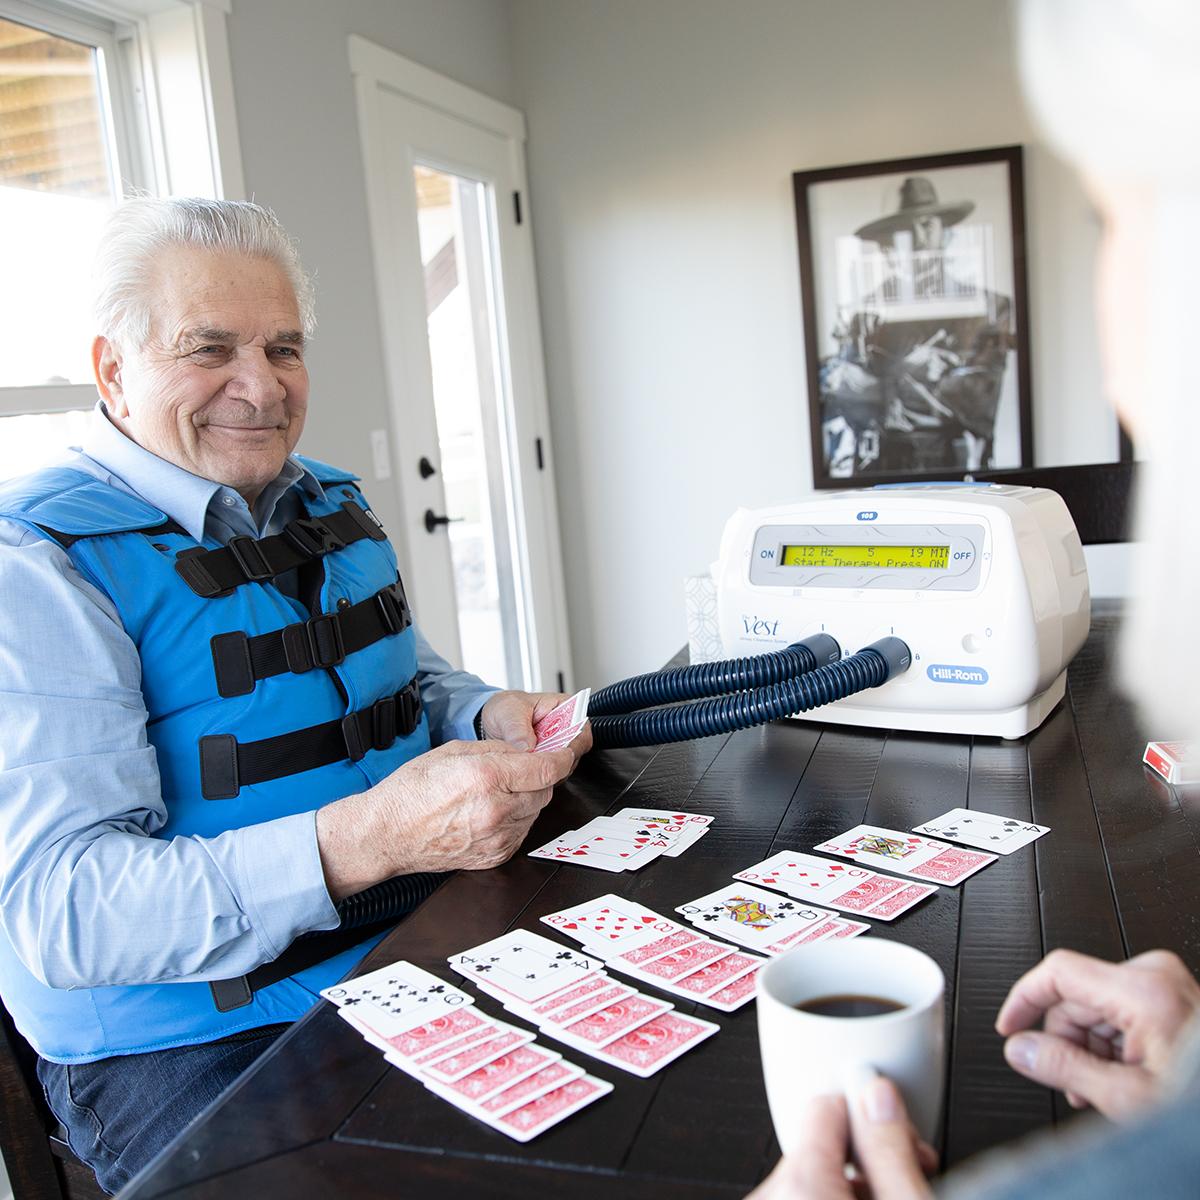 An older man uses The Vest System while playing solitaire at his dining room table.